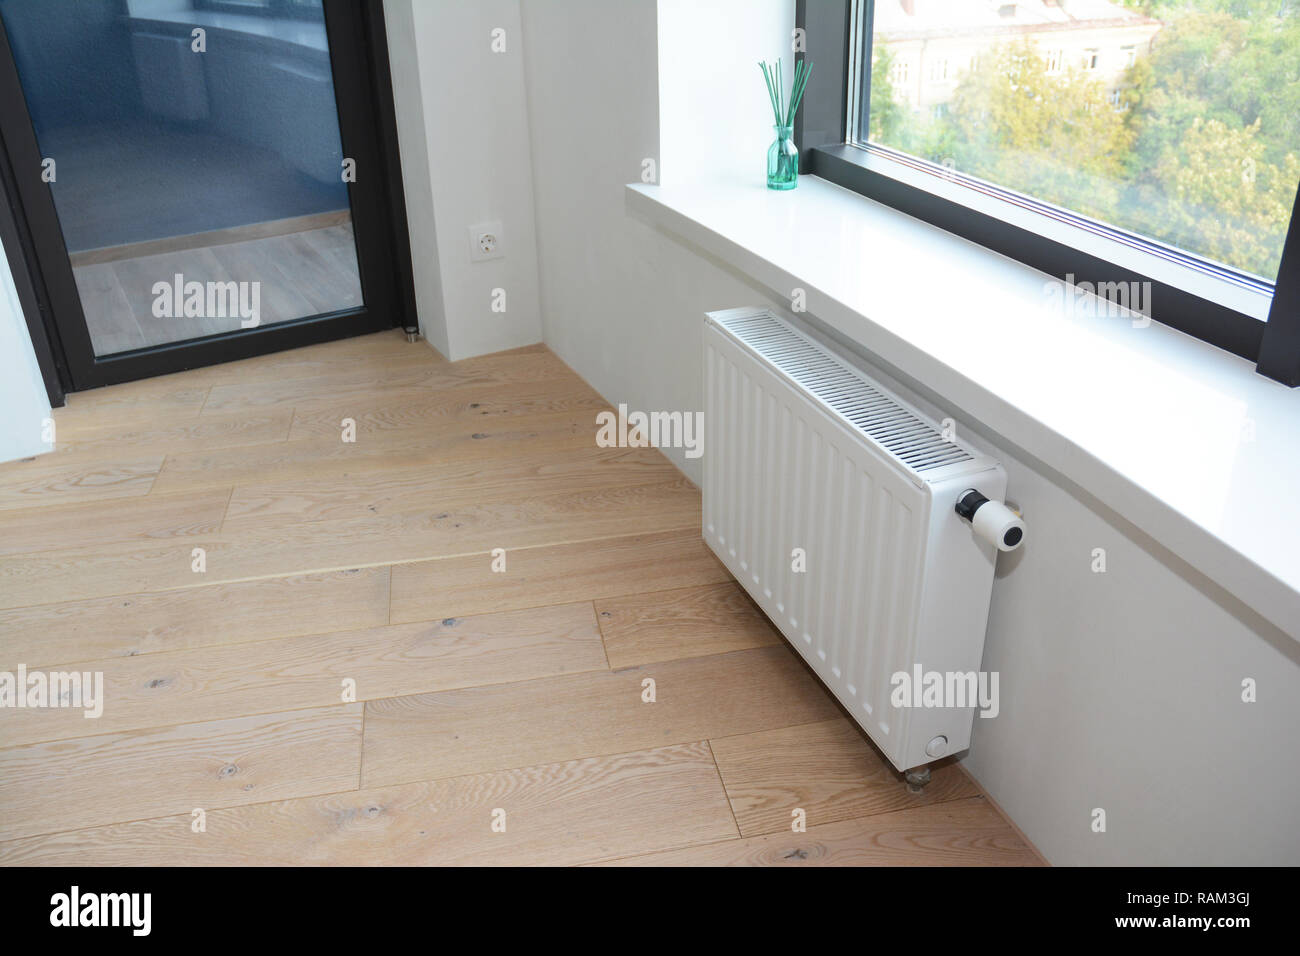 White radiator heating with thermostat for energy saving in unfinished home room repair with balcony door. Stock Photo